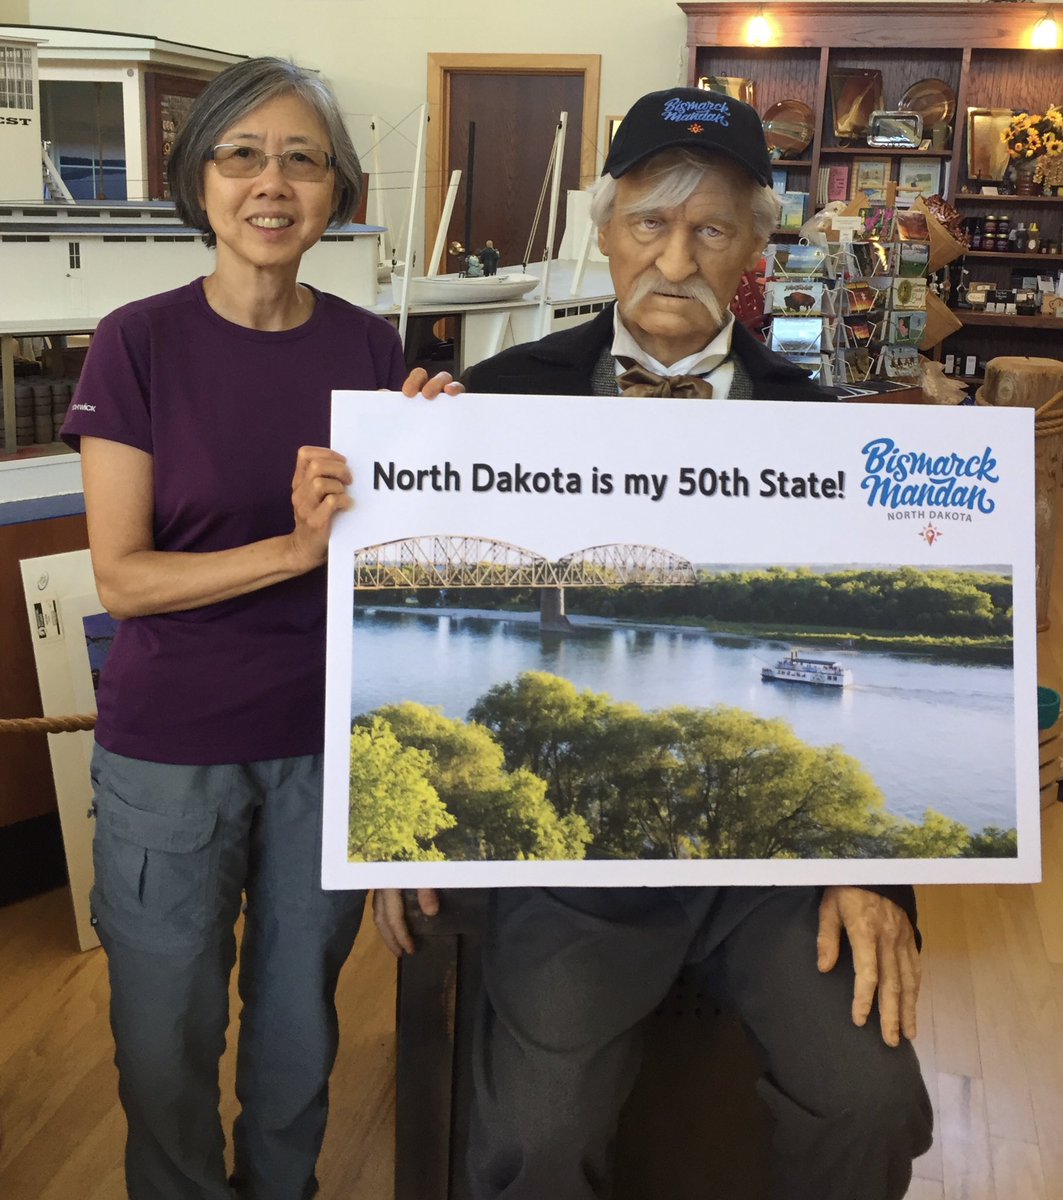 Congratulations to Eck from New Providence, NJ on making #northdakota her #50thstate! We’re so glad you had a great time exploring the area! #noboundariesnd #ilovebisman